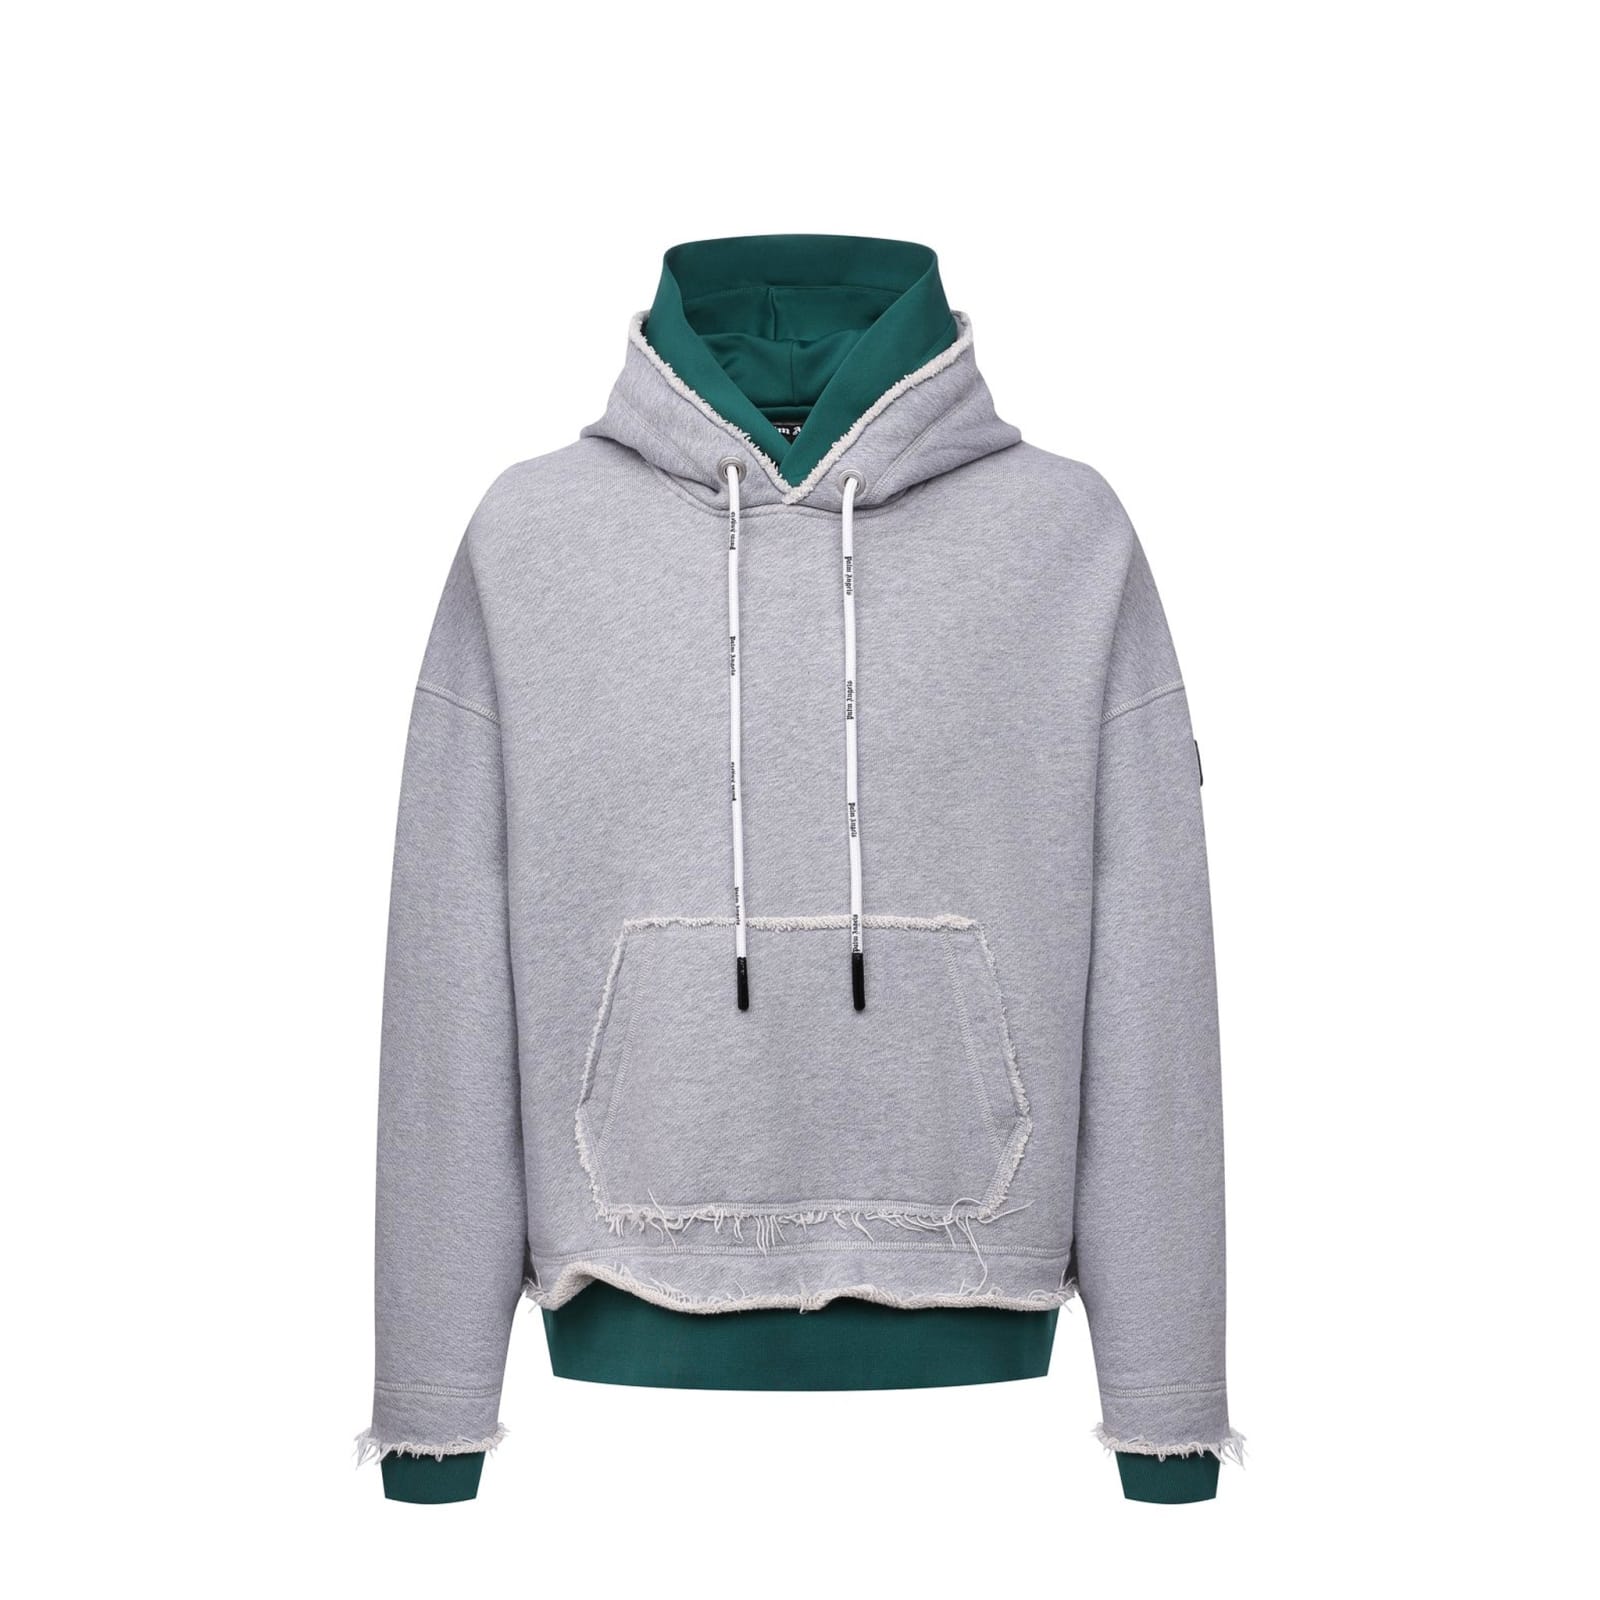 Double Layered Hoodie